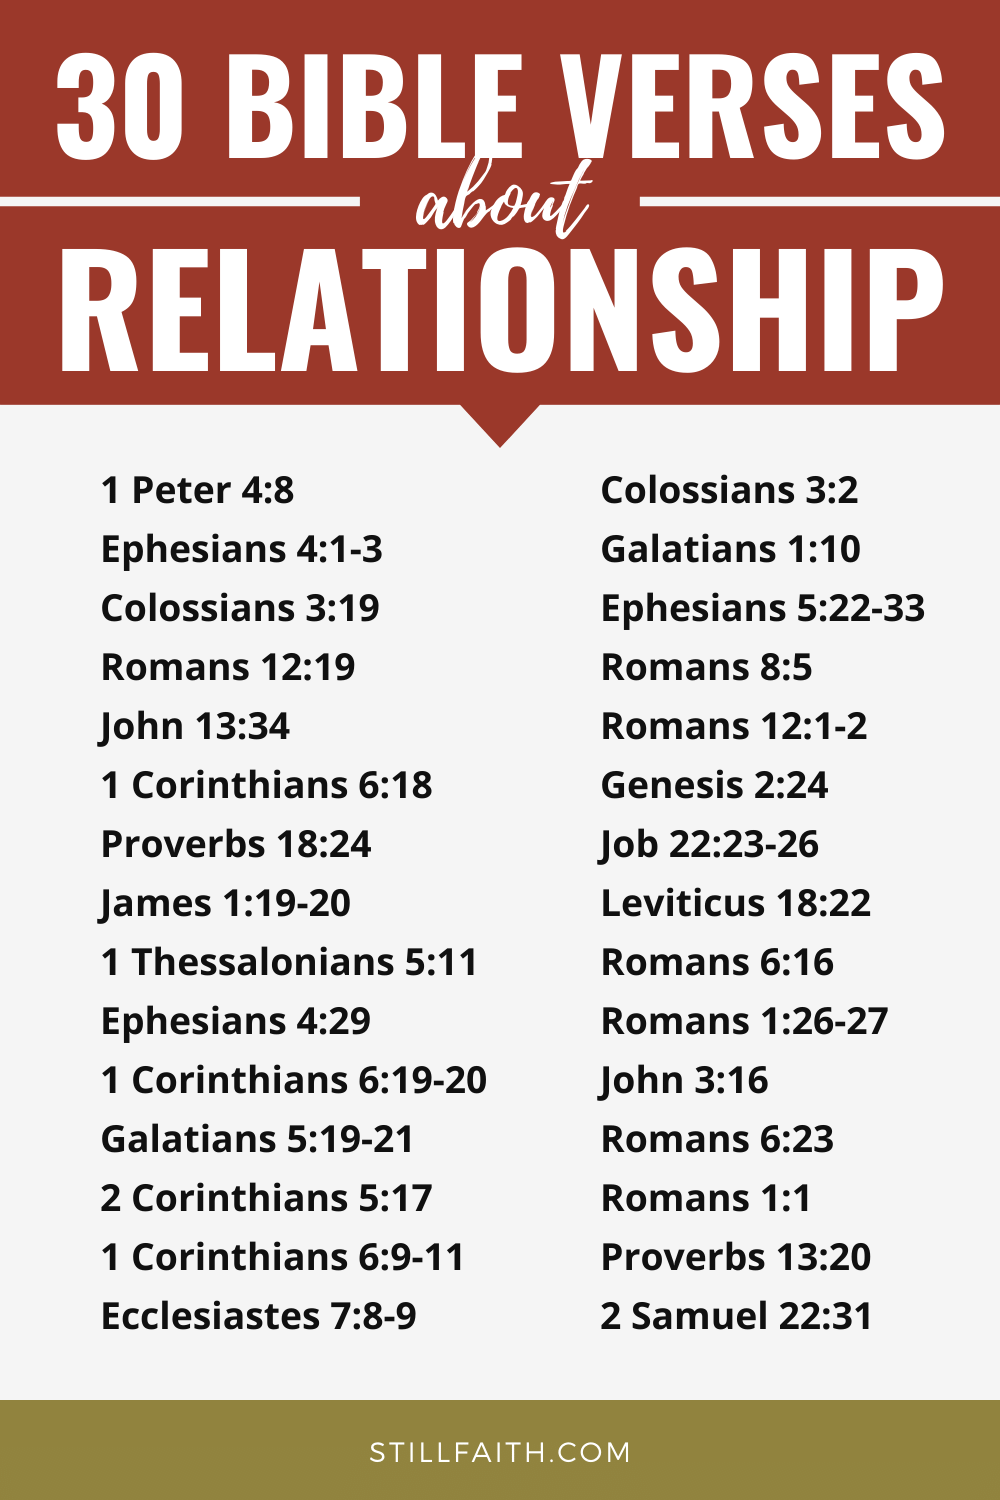 38 Bible Verses about Relationship